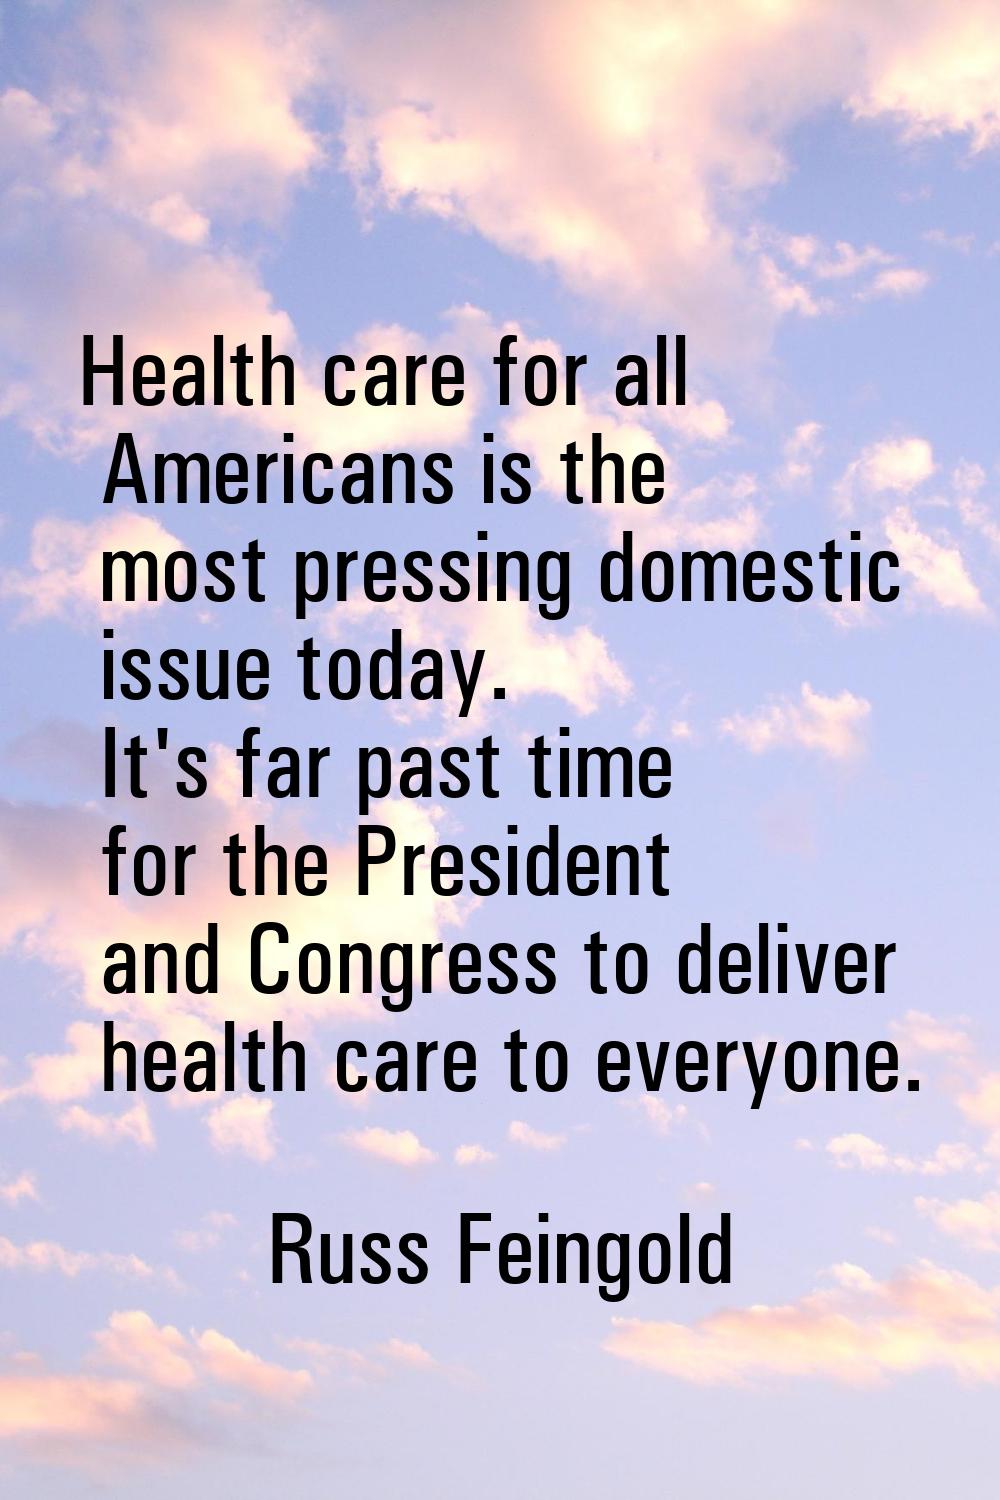 Health care for all Americans is the most pressing domestic issue today. It's far past time for the